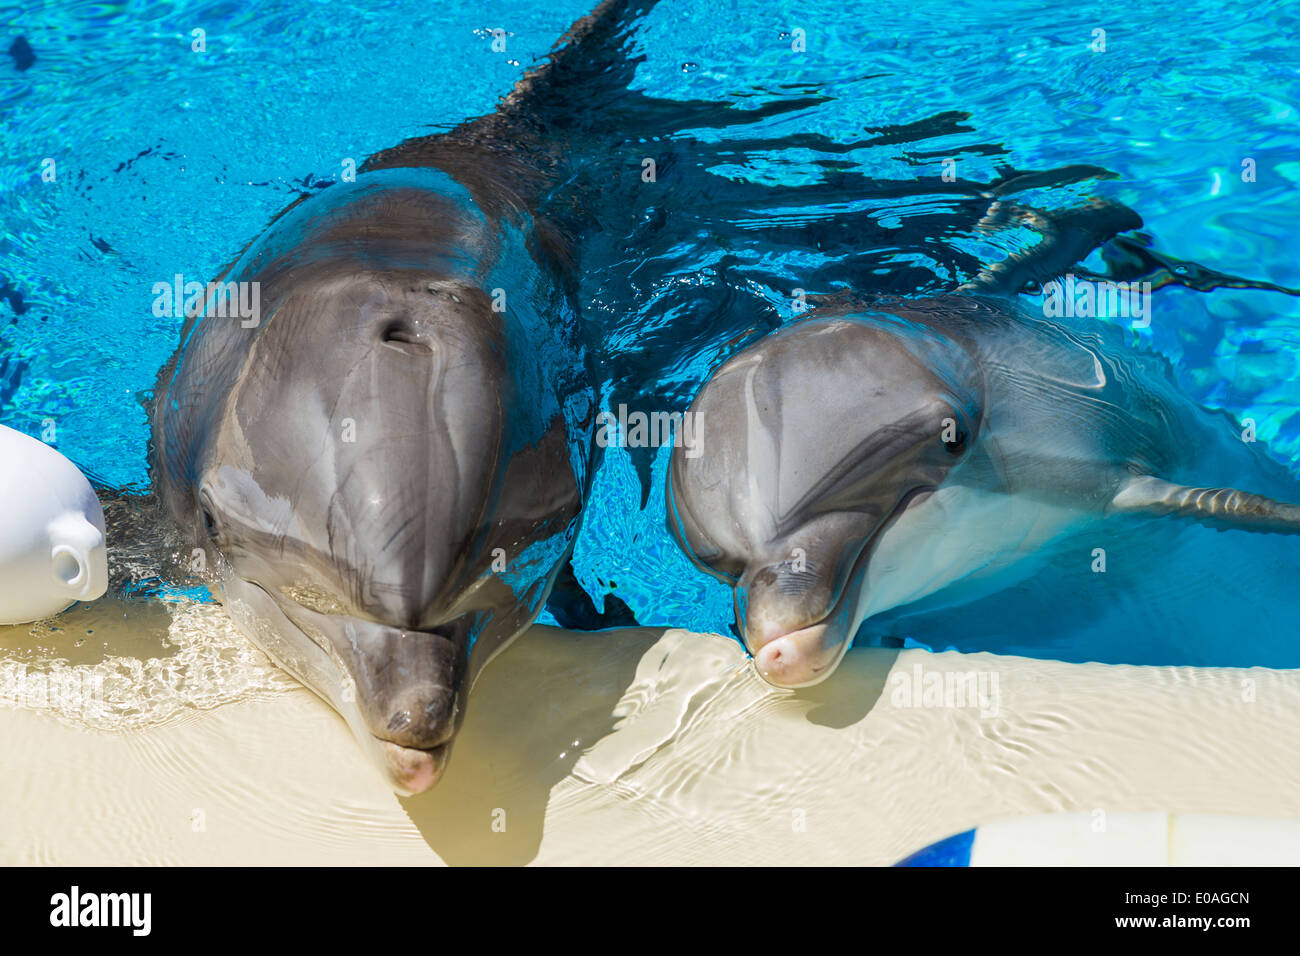 2 Bottlenose dolphins training in a pool,USA Stock Photo